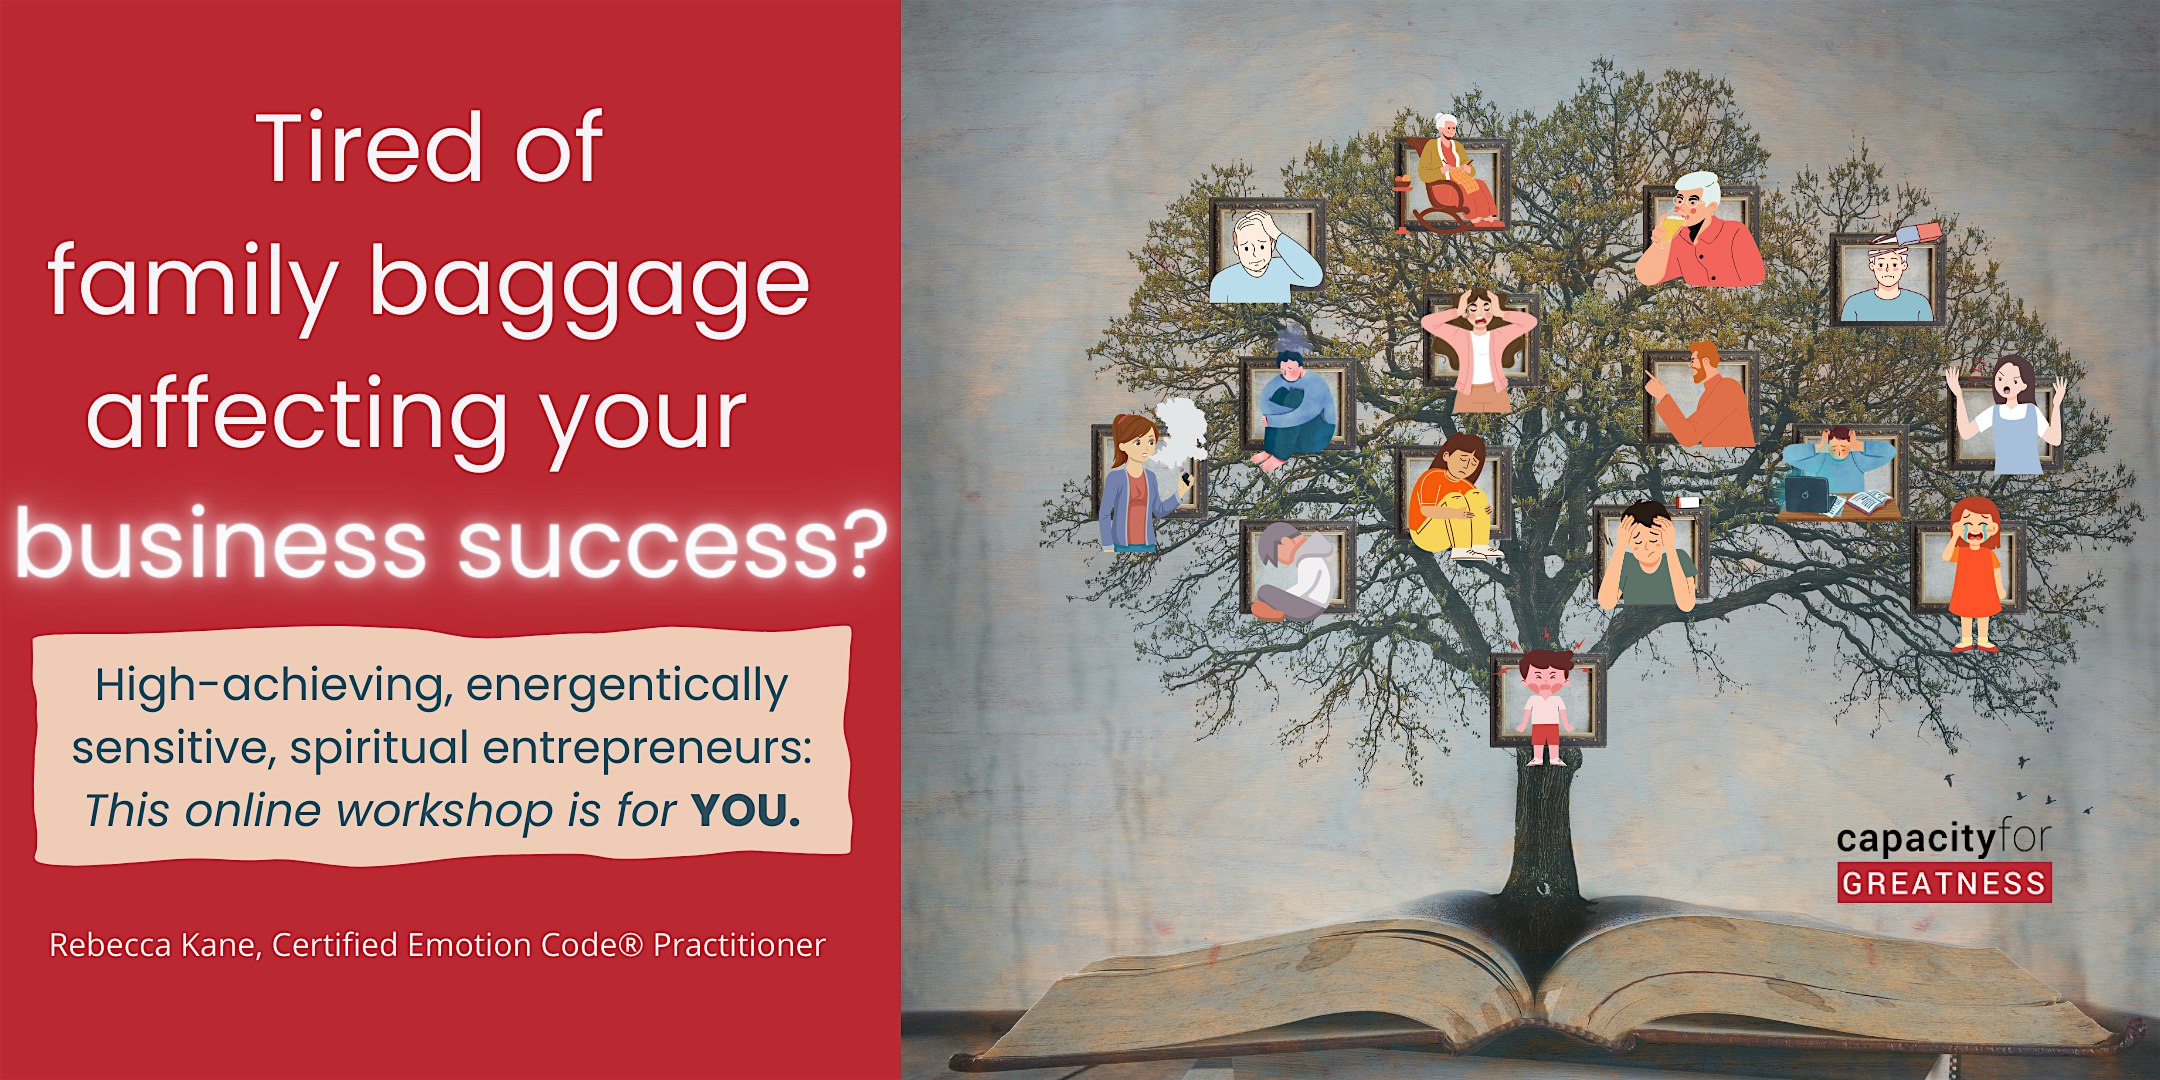 Tired of generational family baggage affecting your business success?